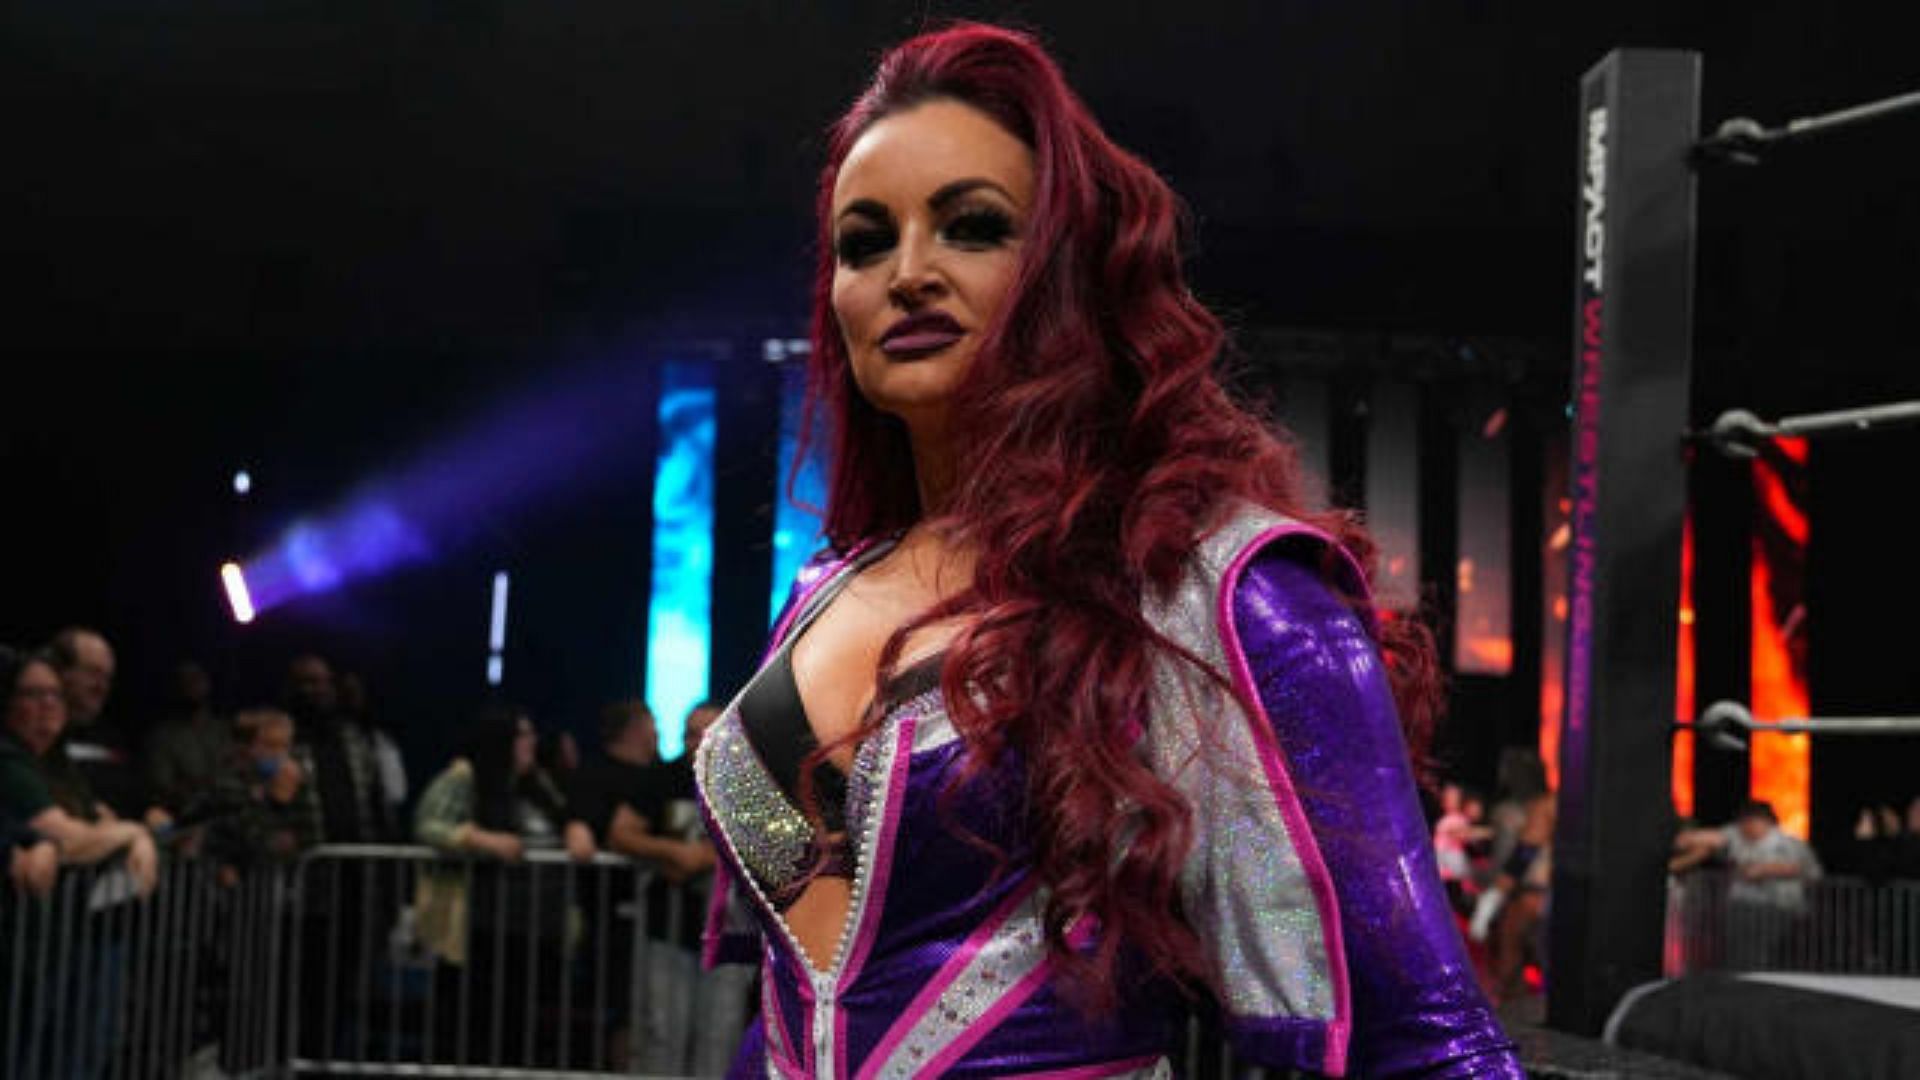 Maria Kanellis is the former 24/7 champion